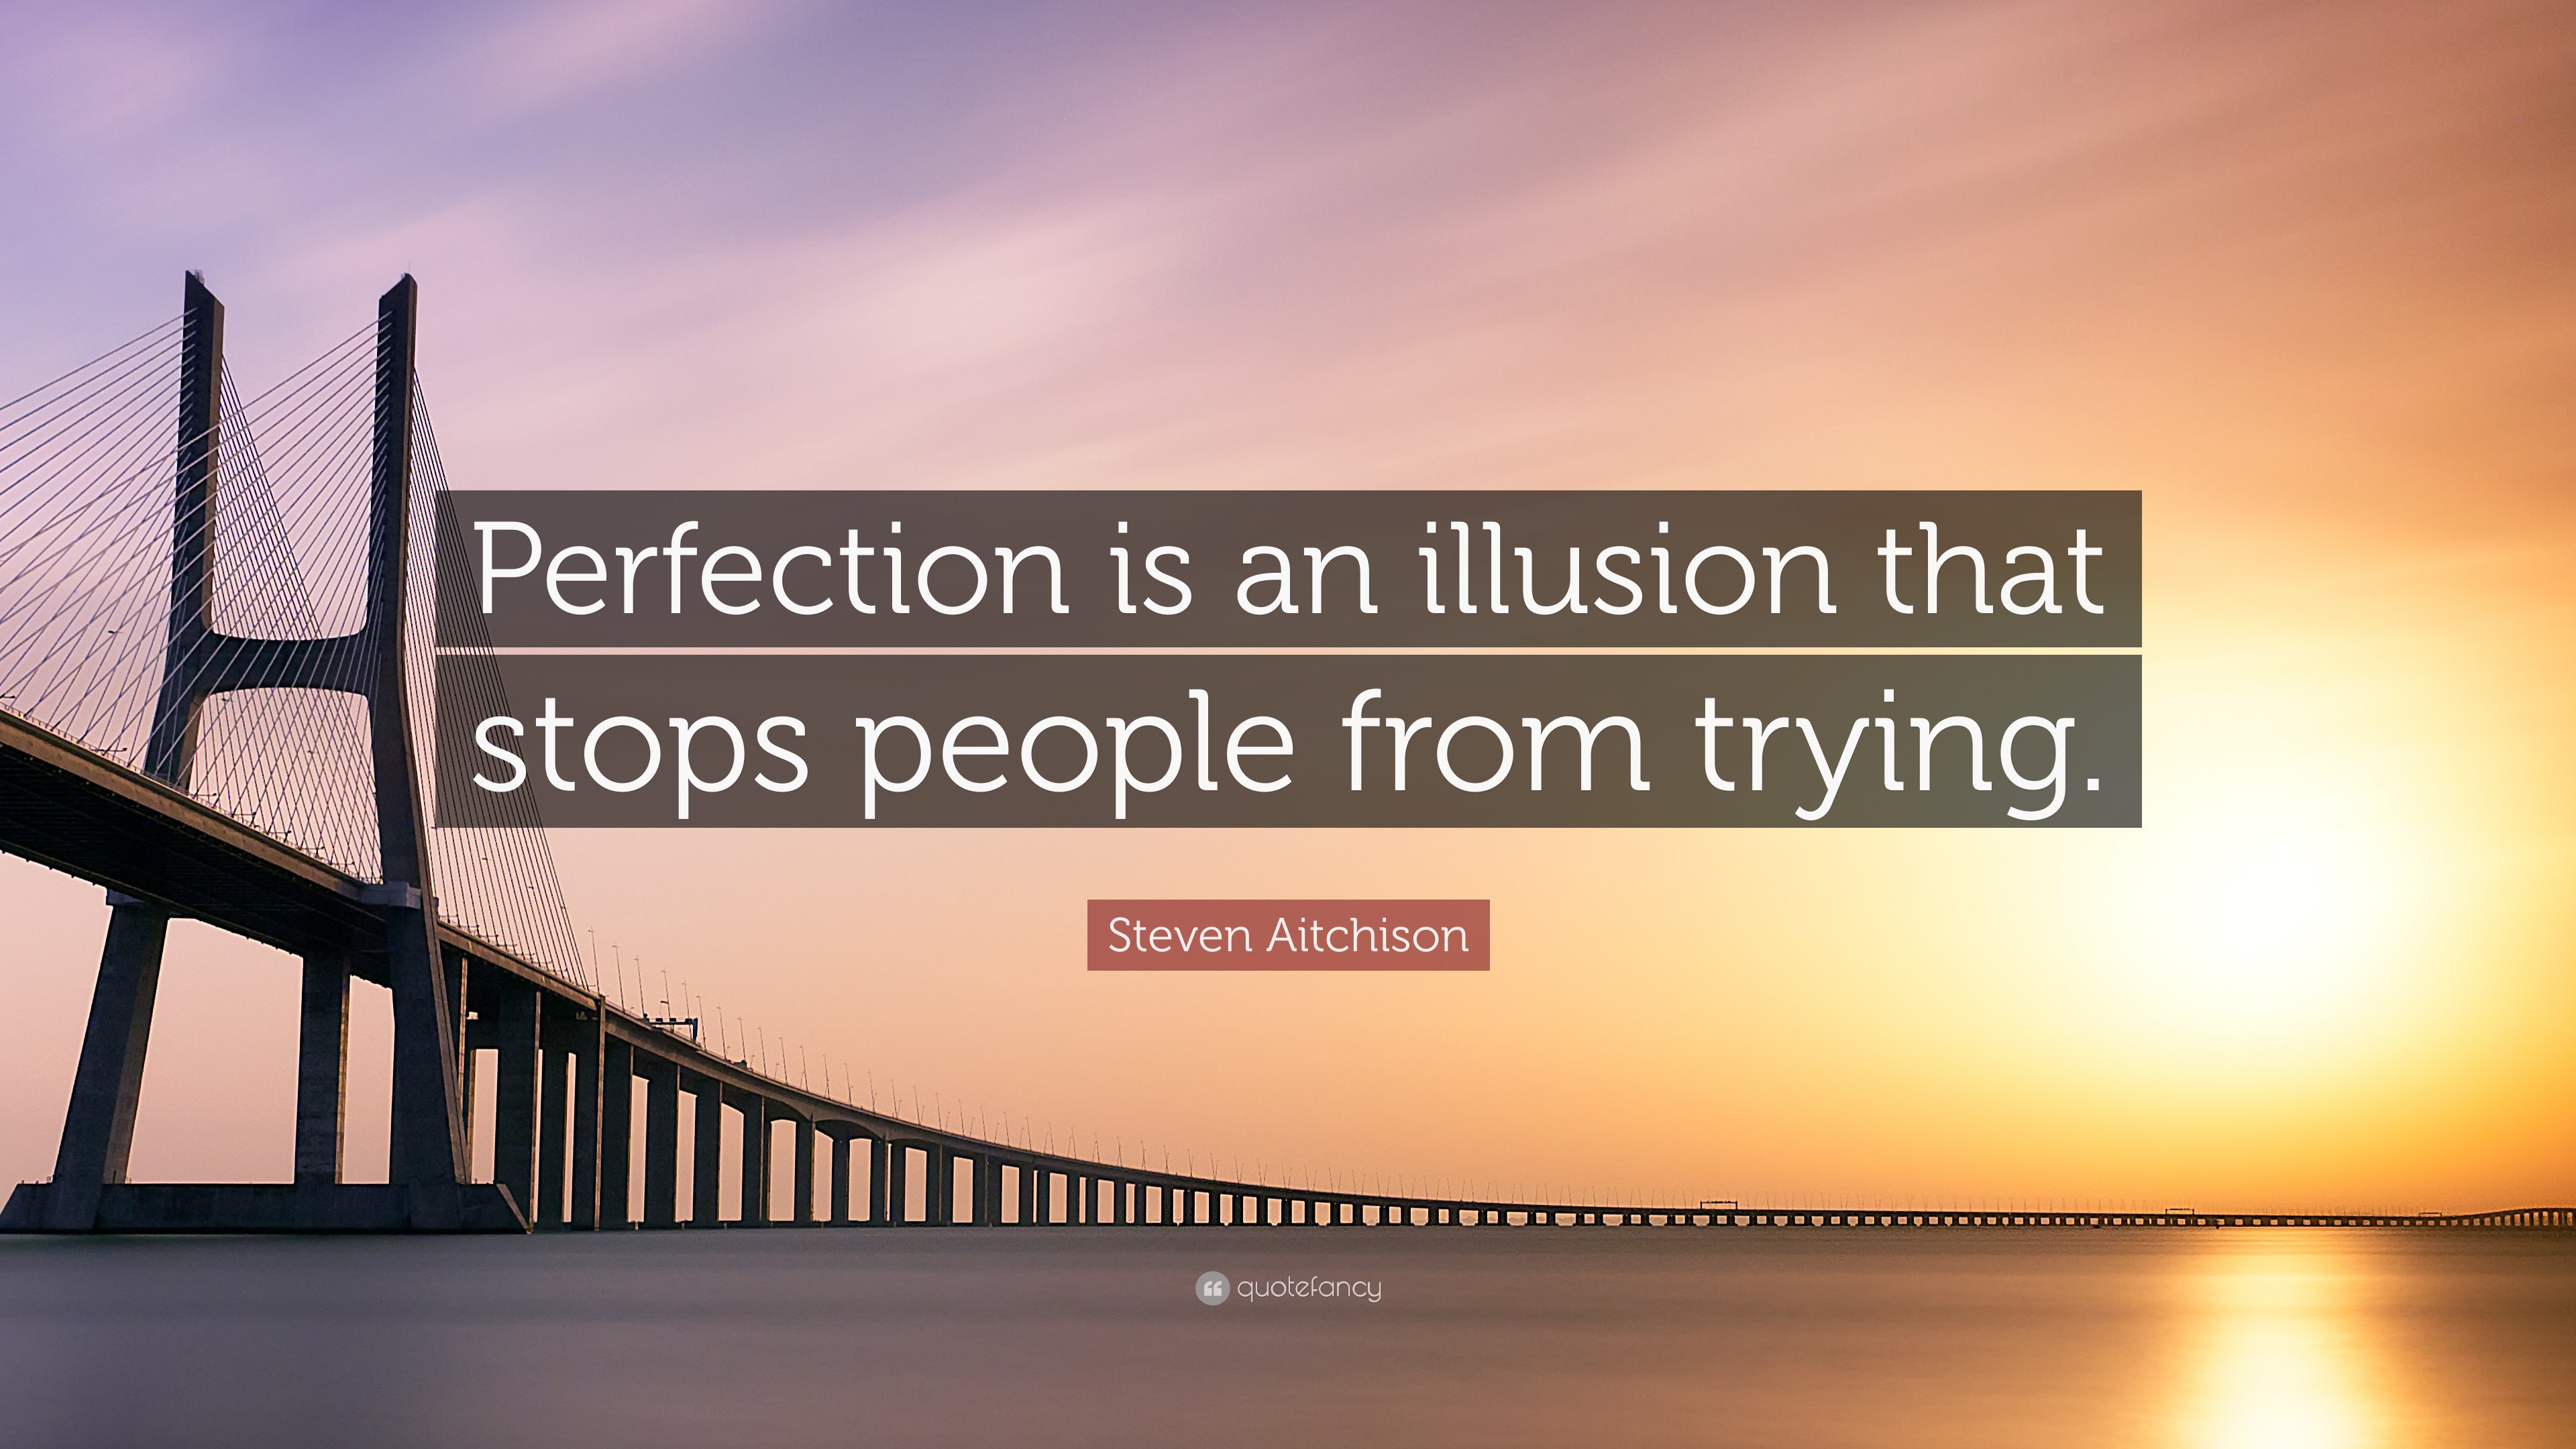 Steven Aitchison Quote: “Perfection is an illusion that stops people ...